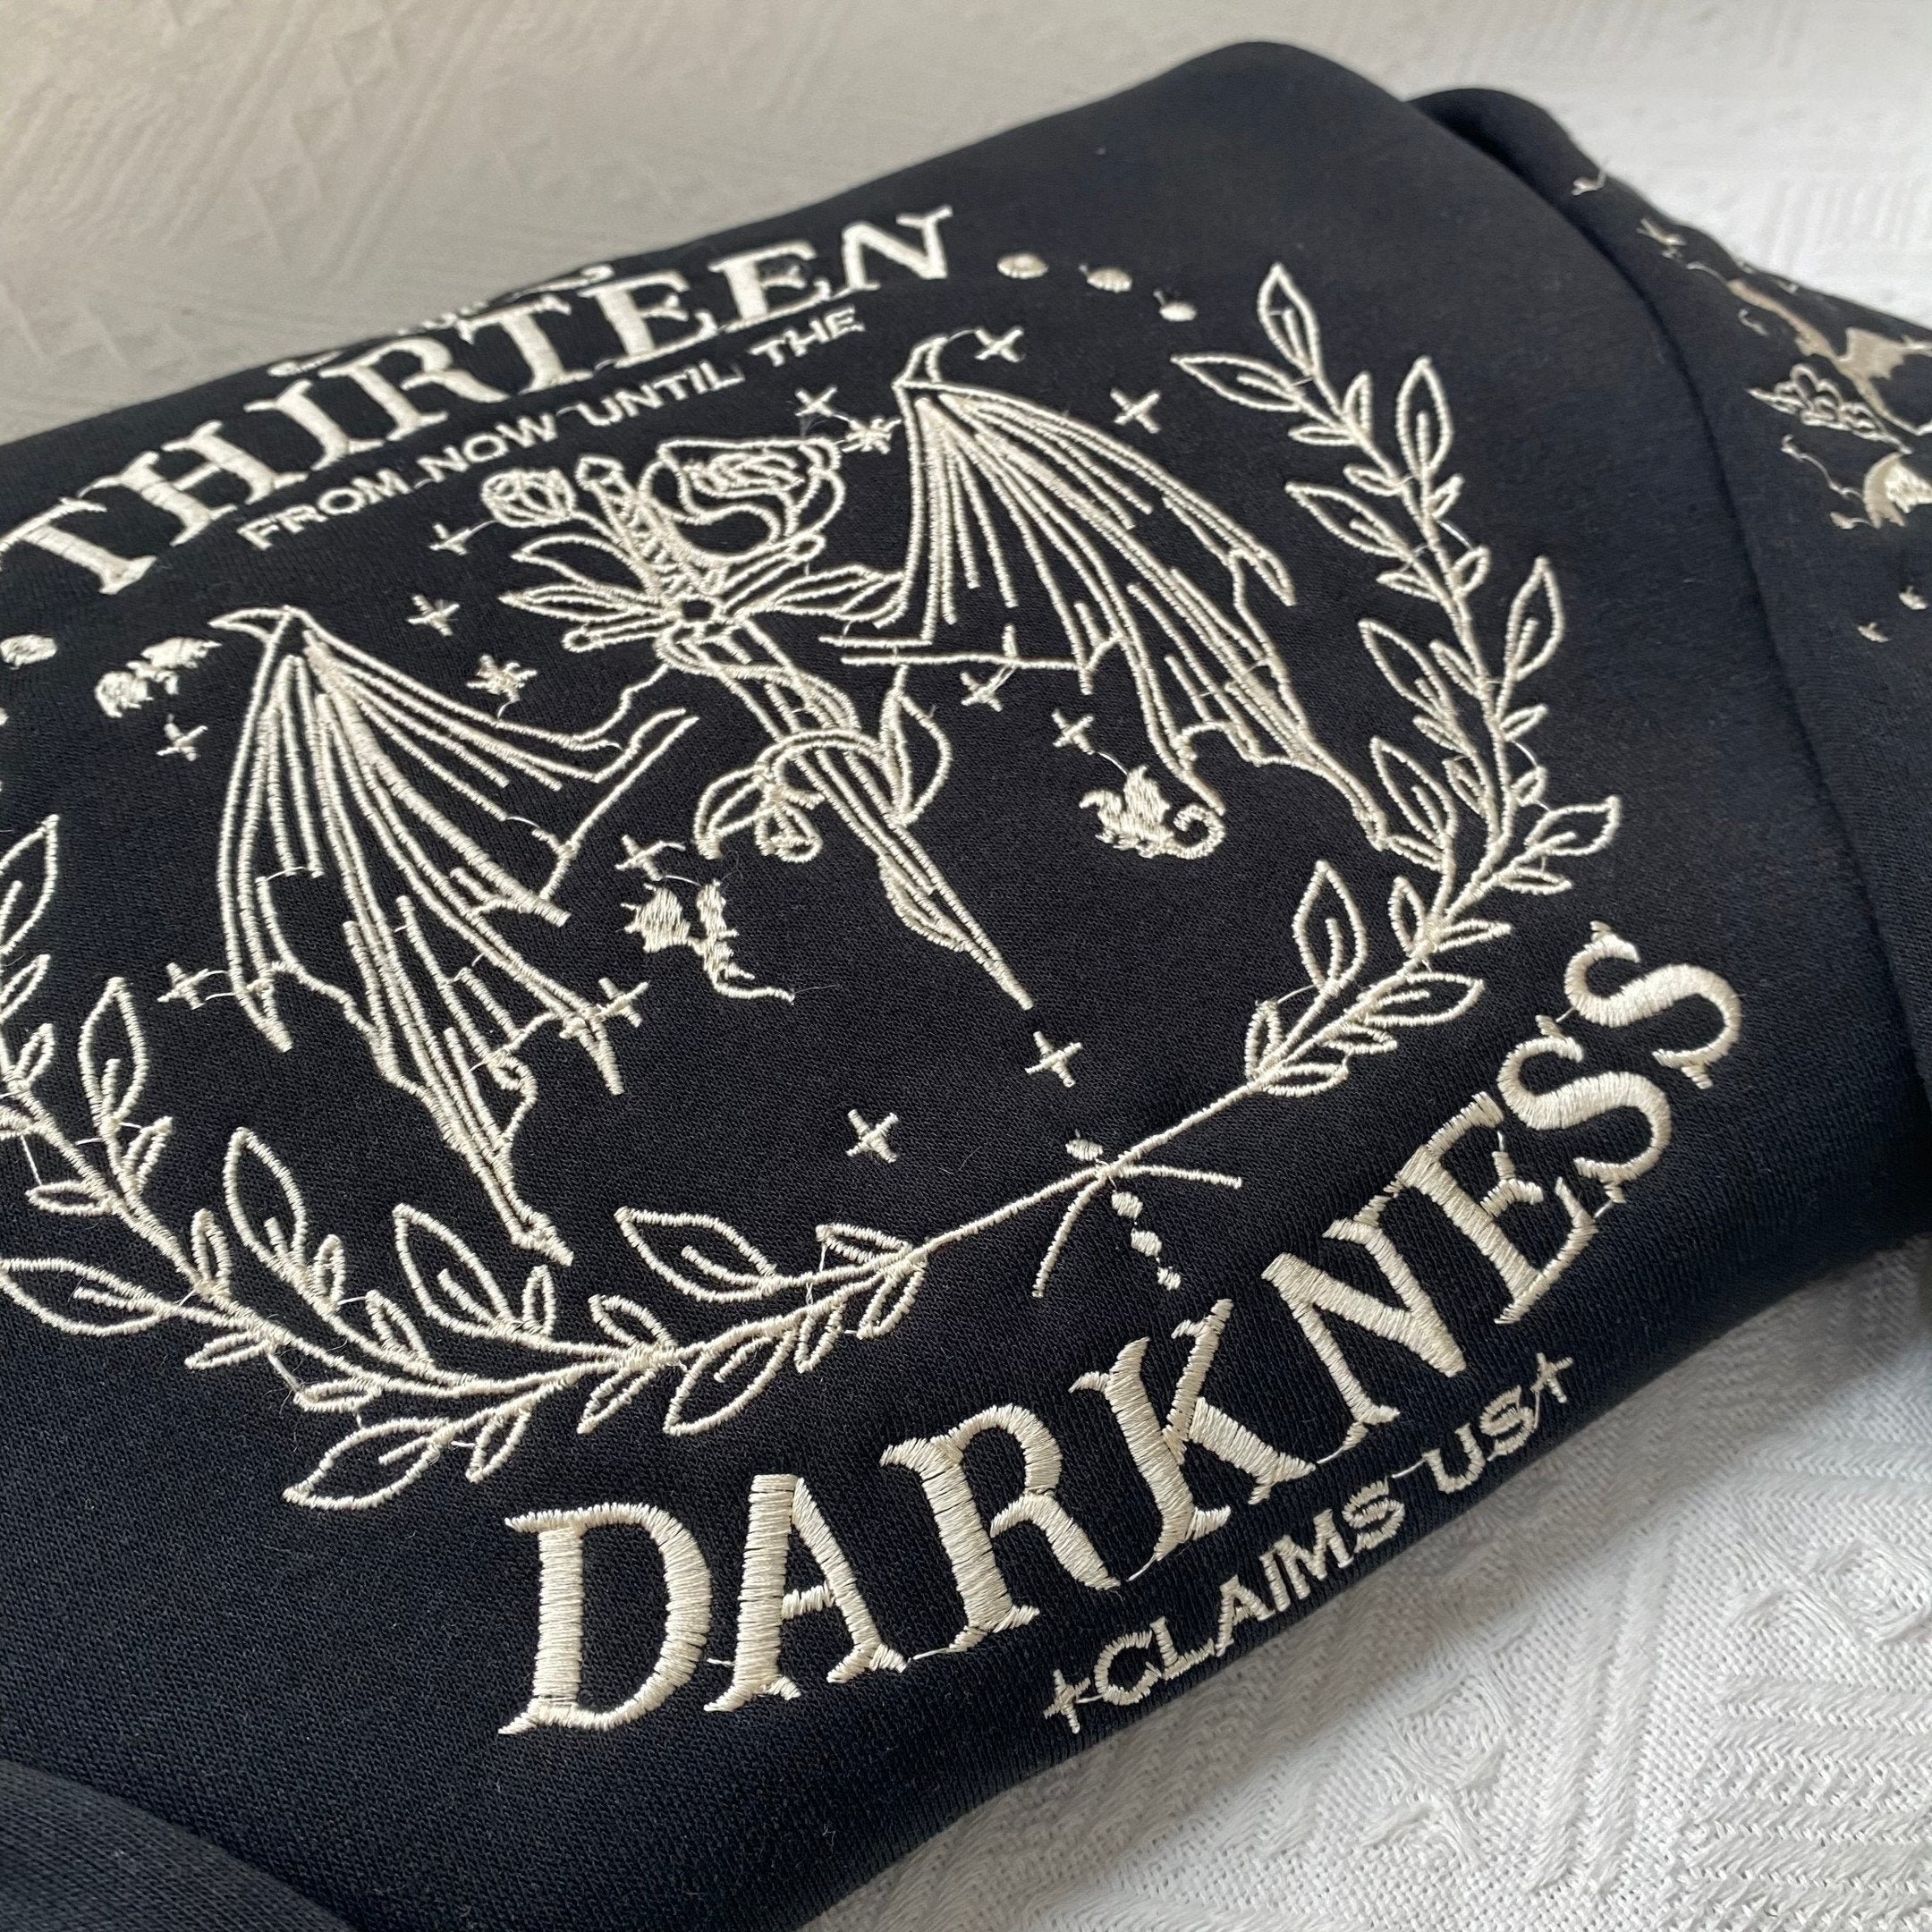 The Thirteen Throne Of Glass Embroidered Sweatshirt, From Now Until the Darkness Claims Us Embroidered Hoodie, Bookish Gift